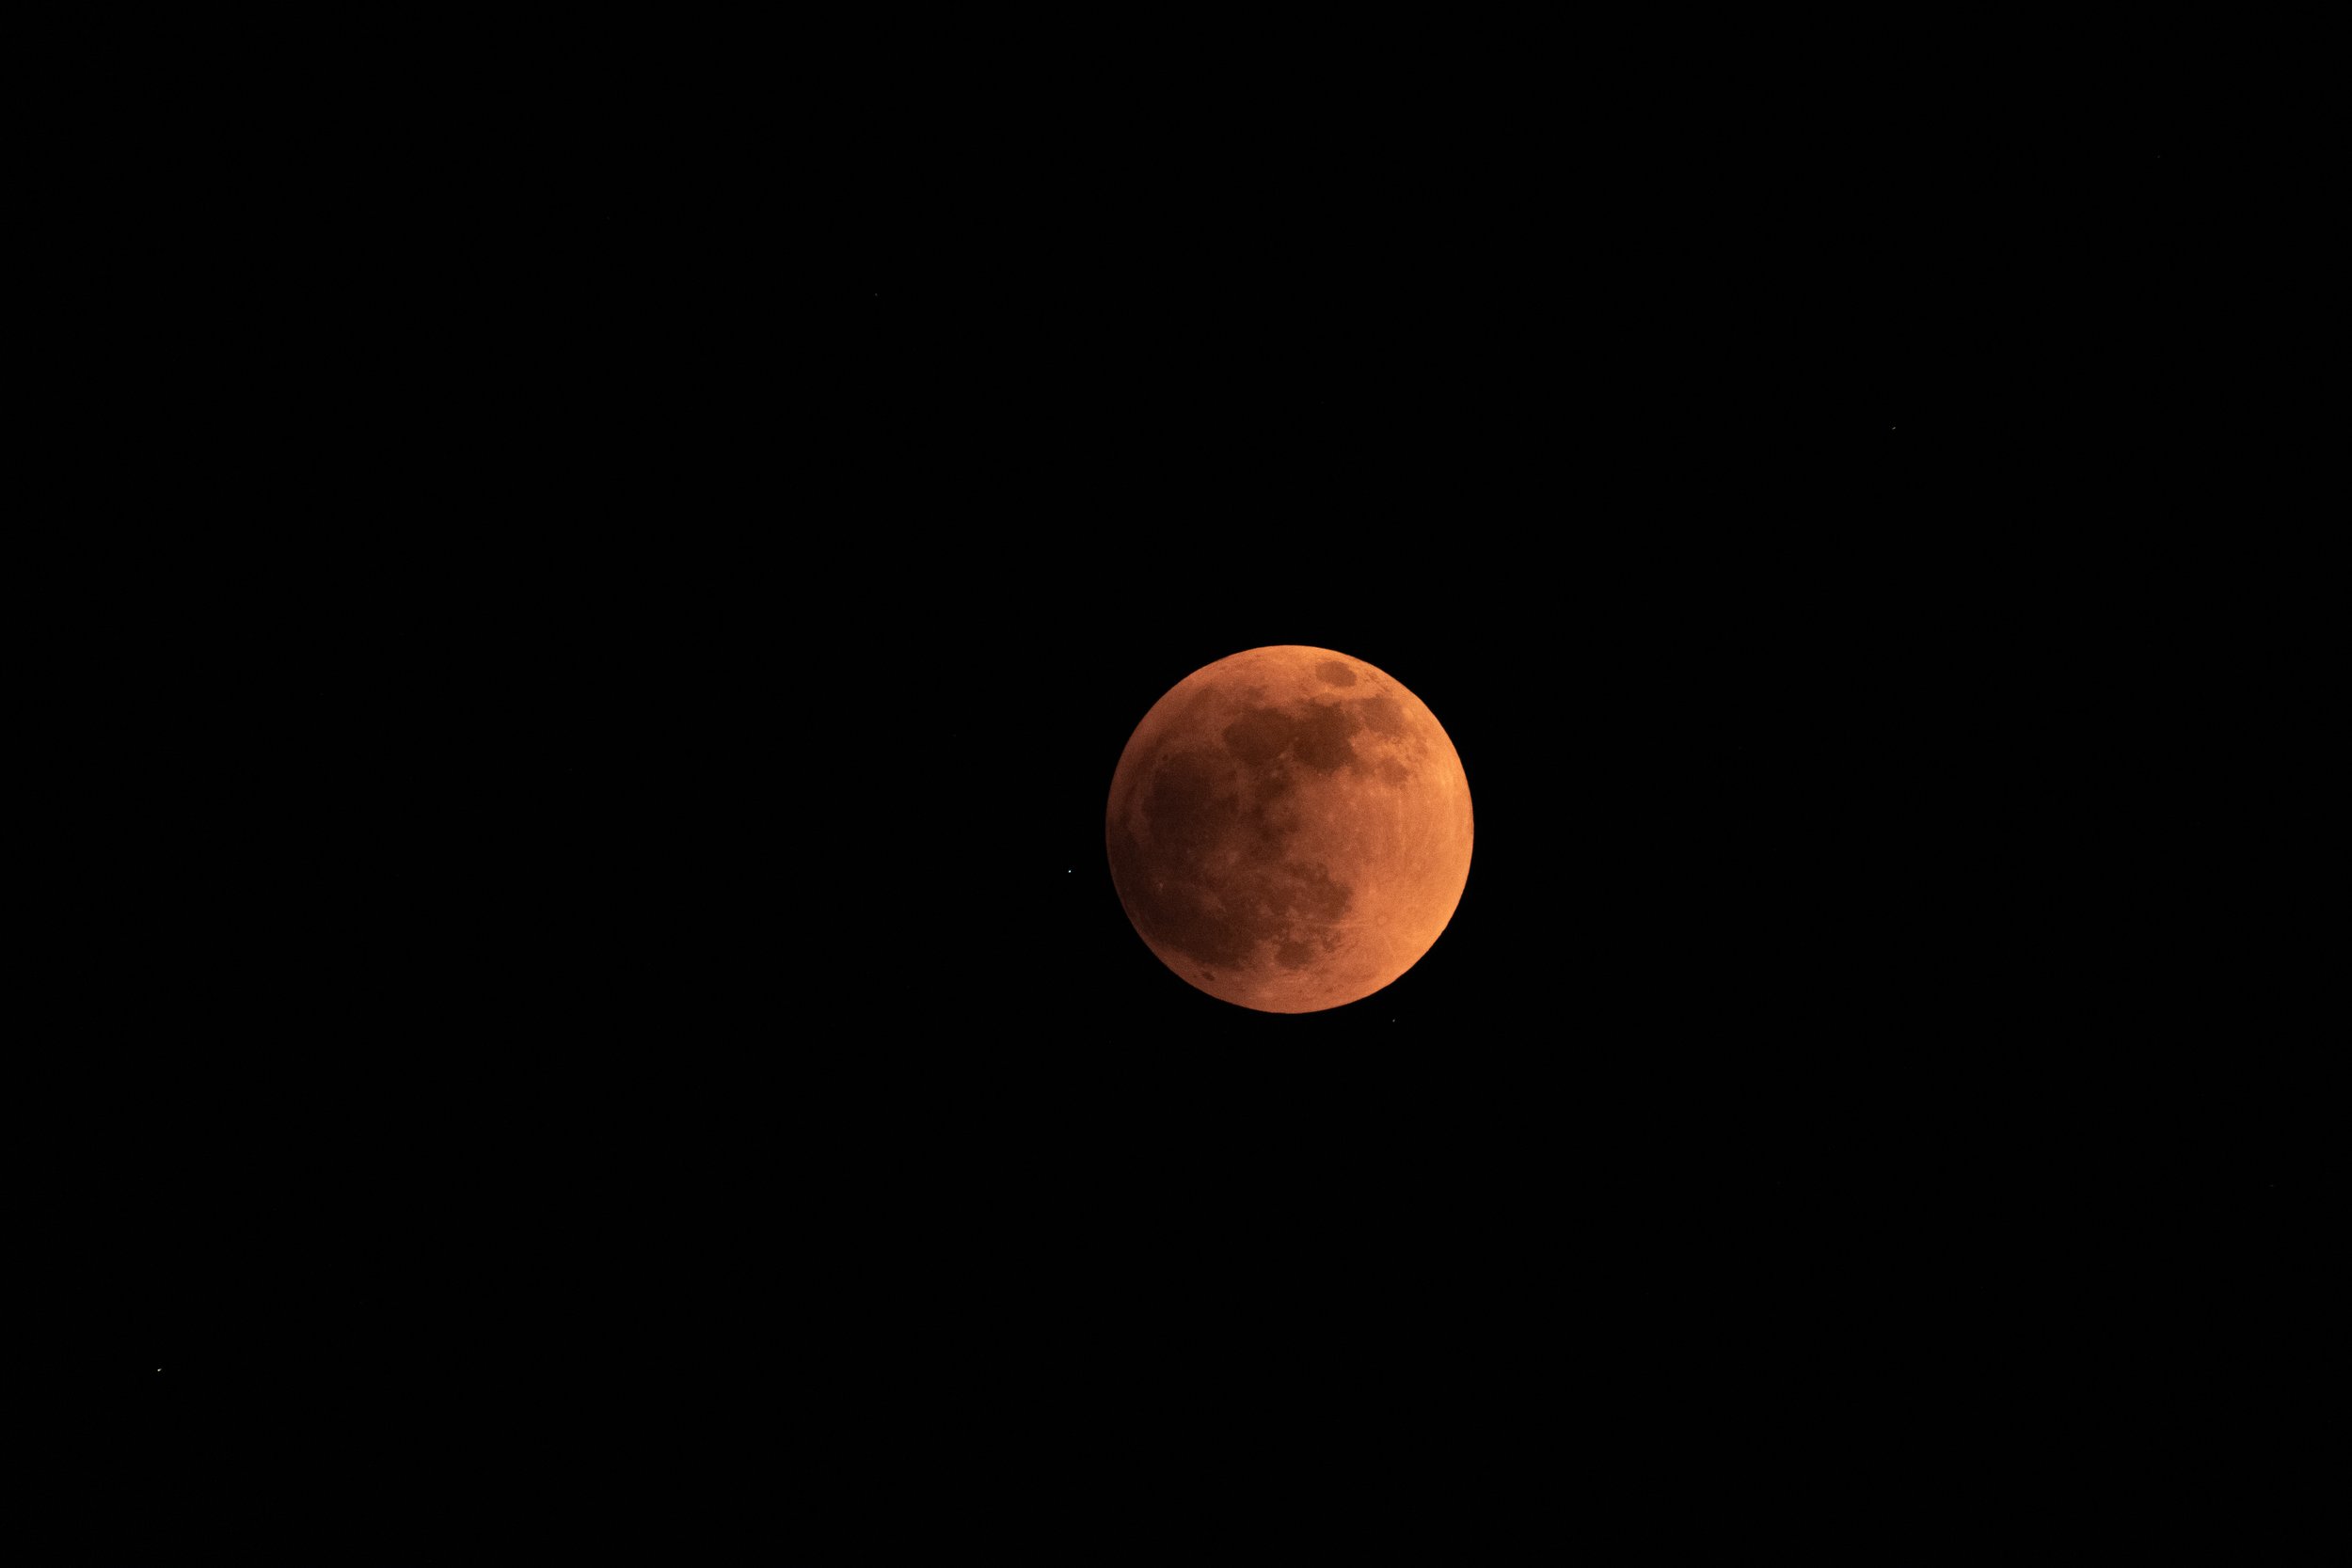  Image of the moon taken during a lunar eclipse 